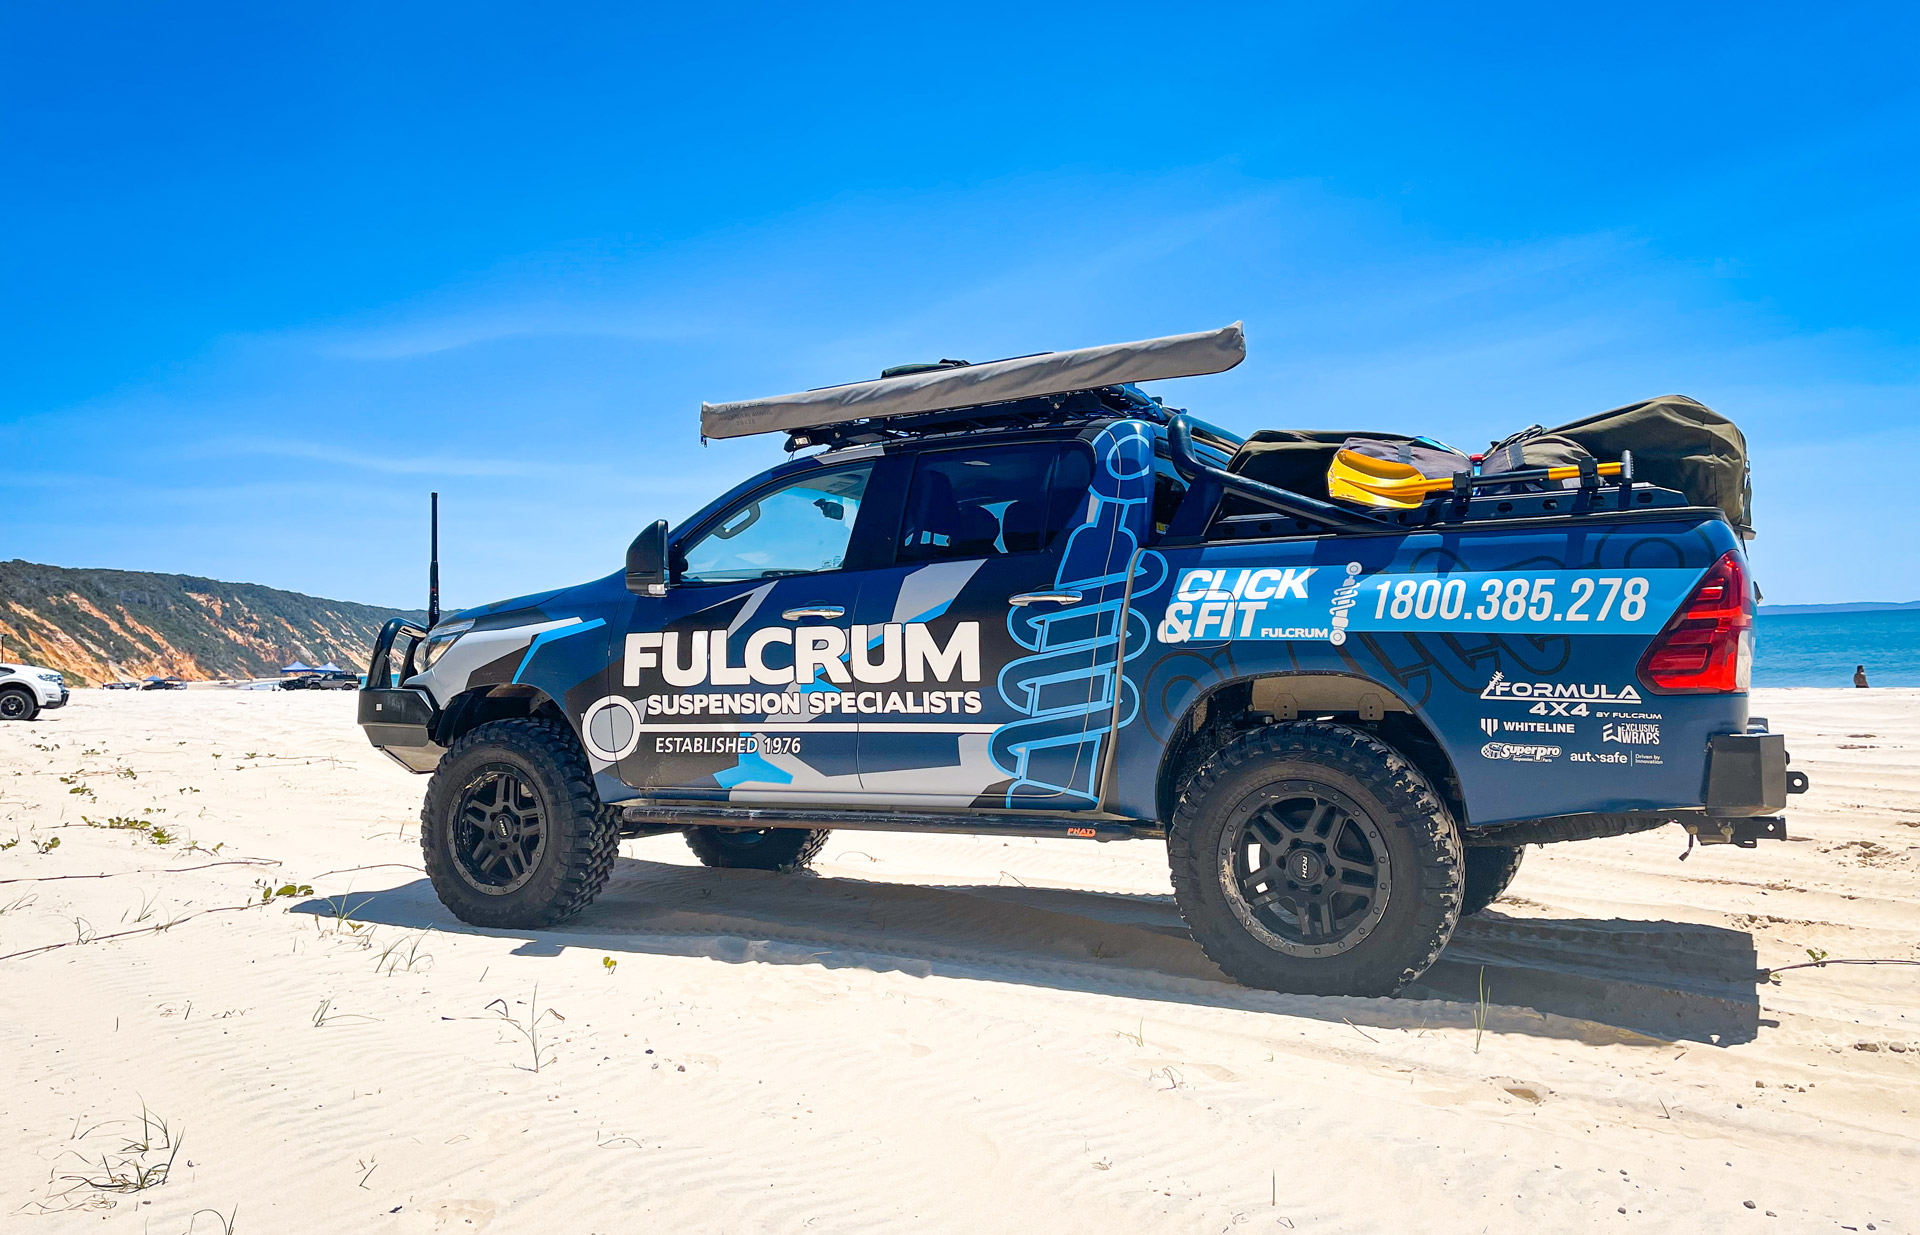 ROH Hammer 4x4 wheels on Toyota HiLux at the beach